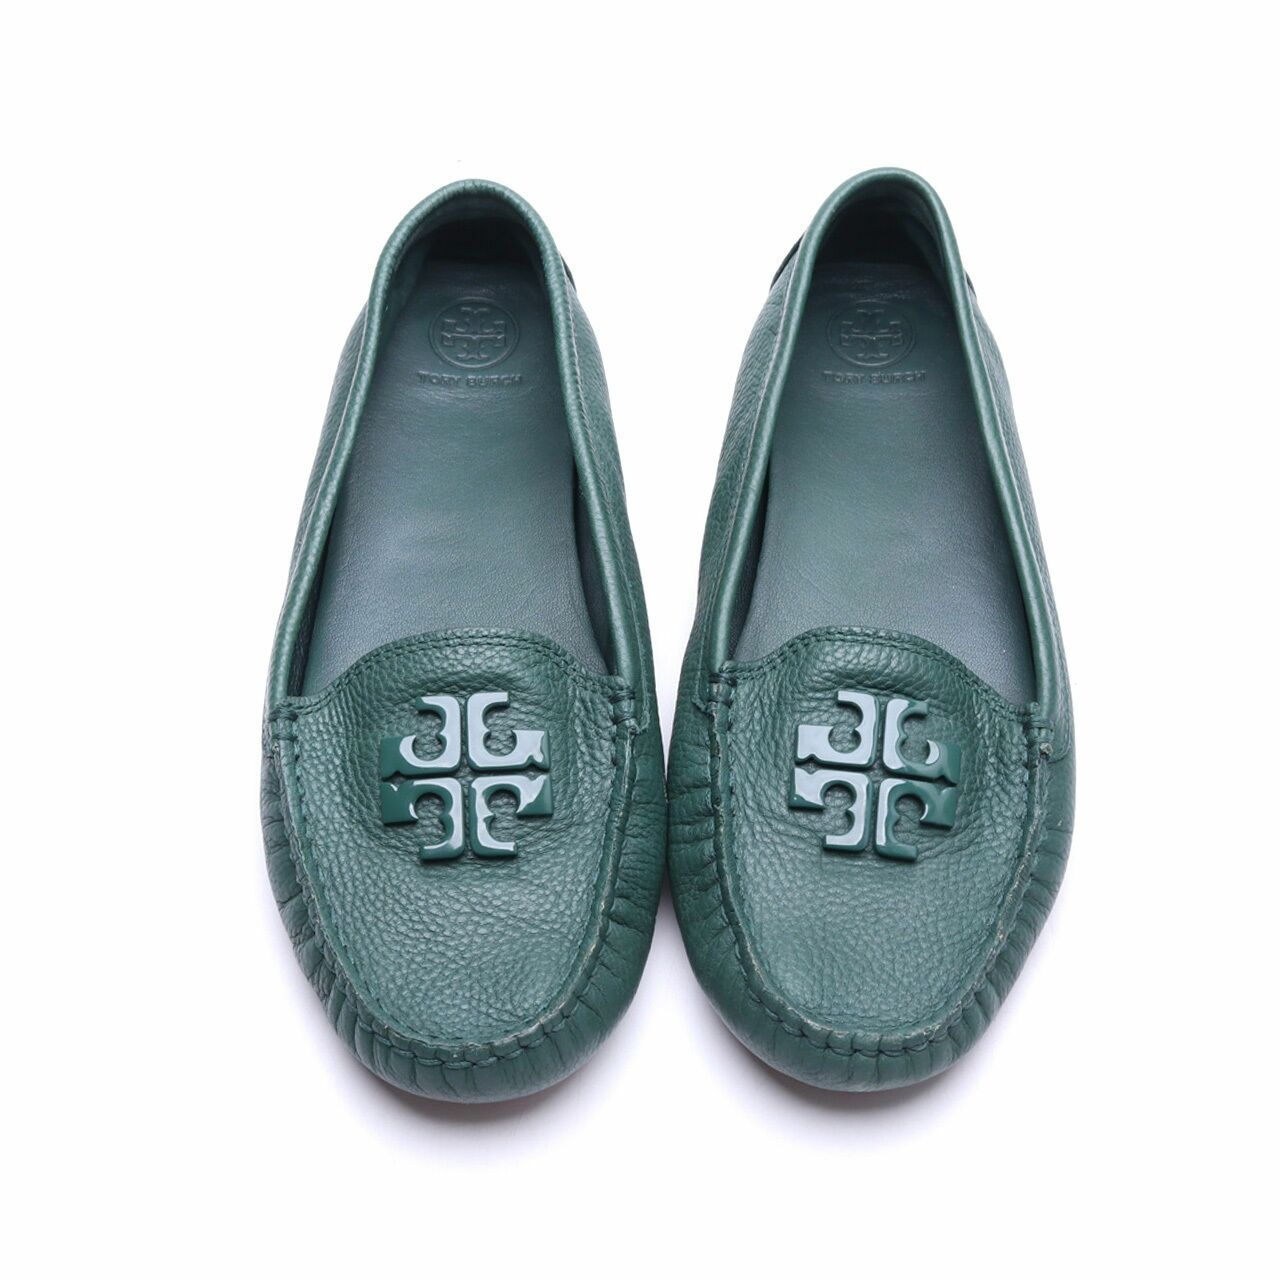 Tory Burch Green/ Norwood Lowell 2 Driver Tumbled Leather Flats Shoes